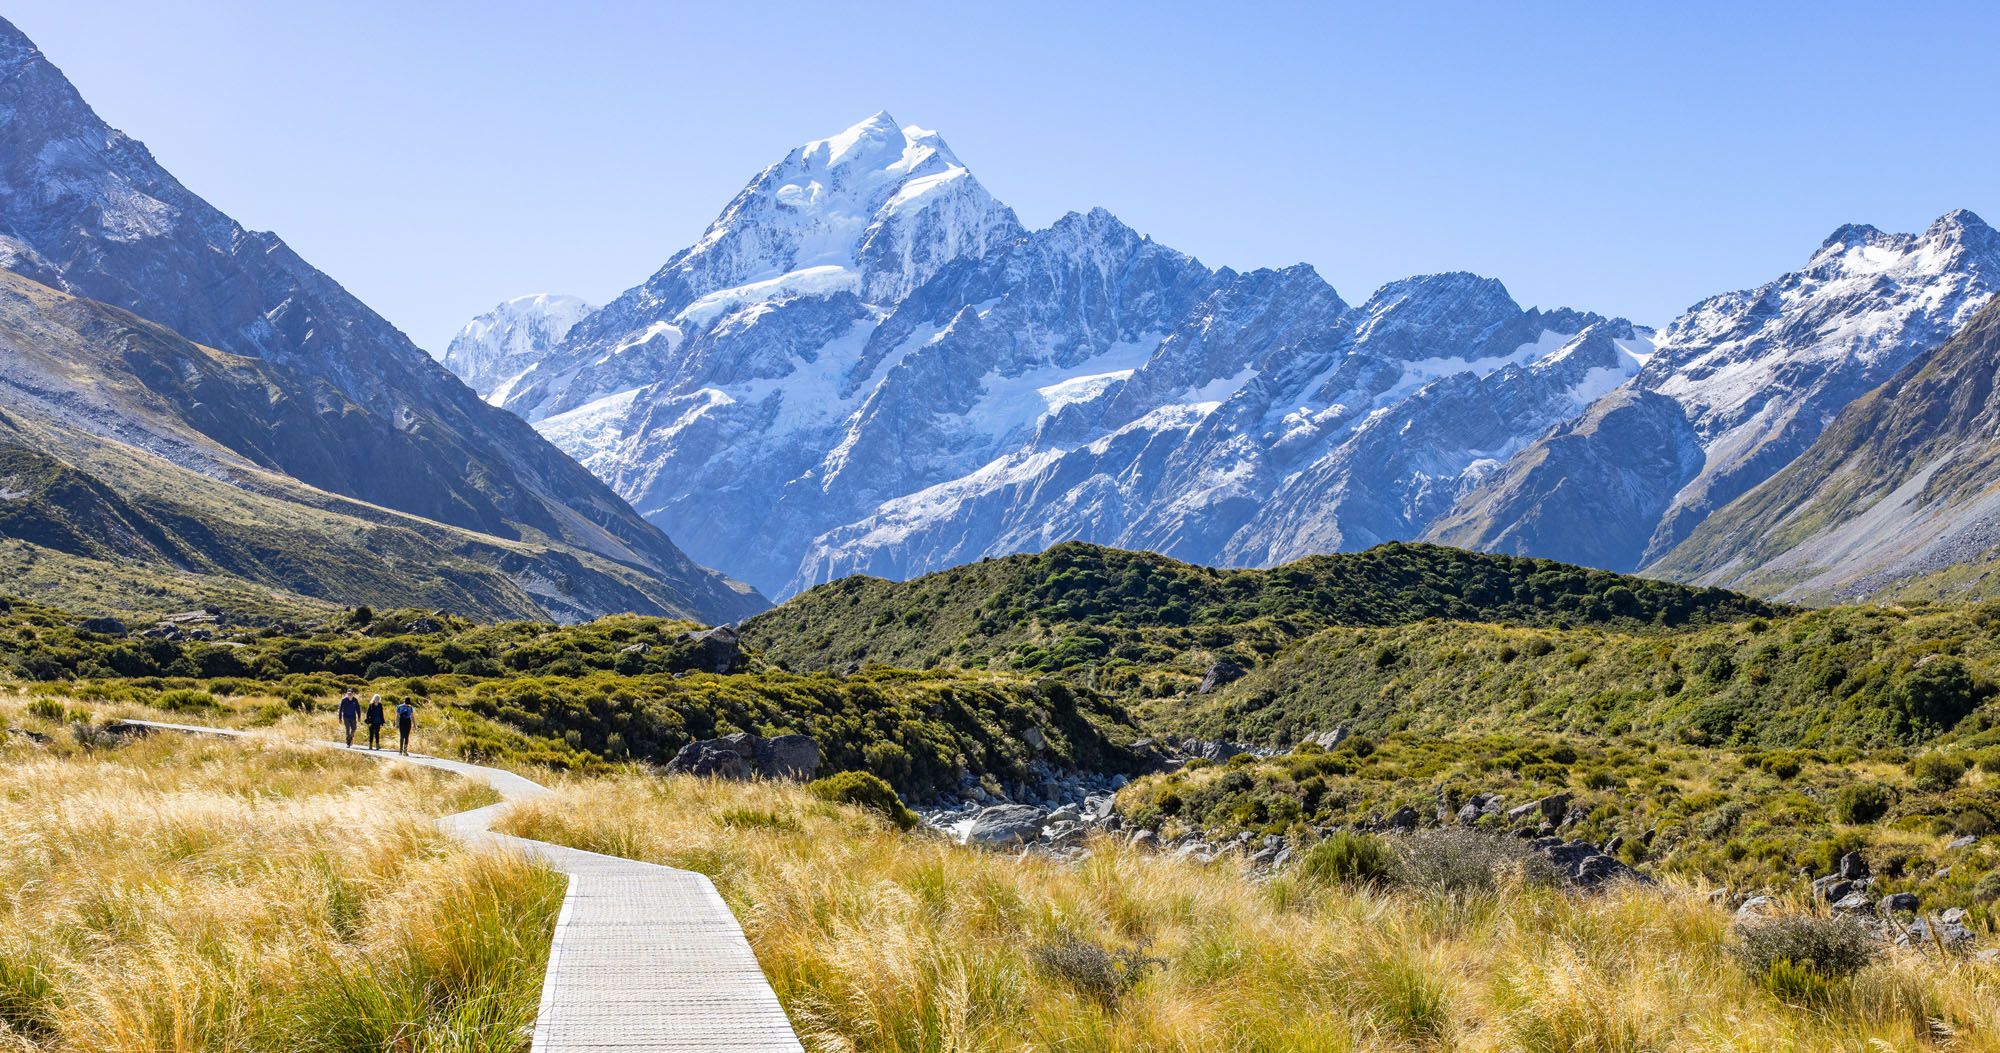 Featured image for “15 Amazing Things to Do in Aoraki / Mount Cook National Park”